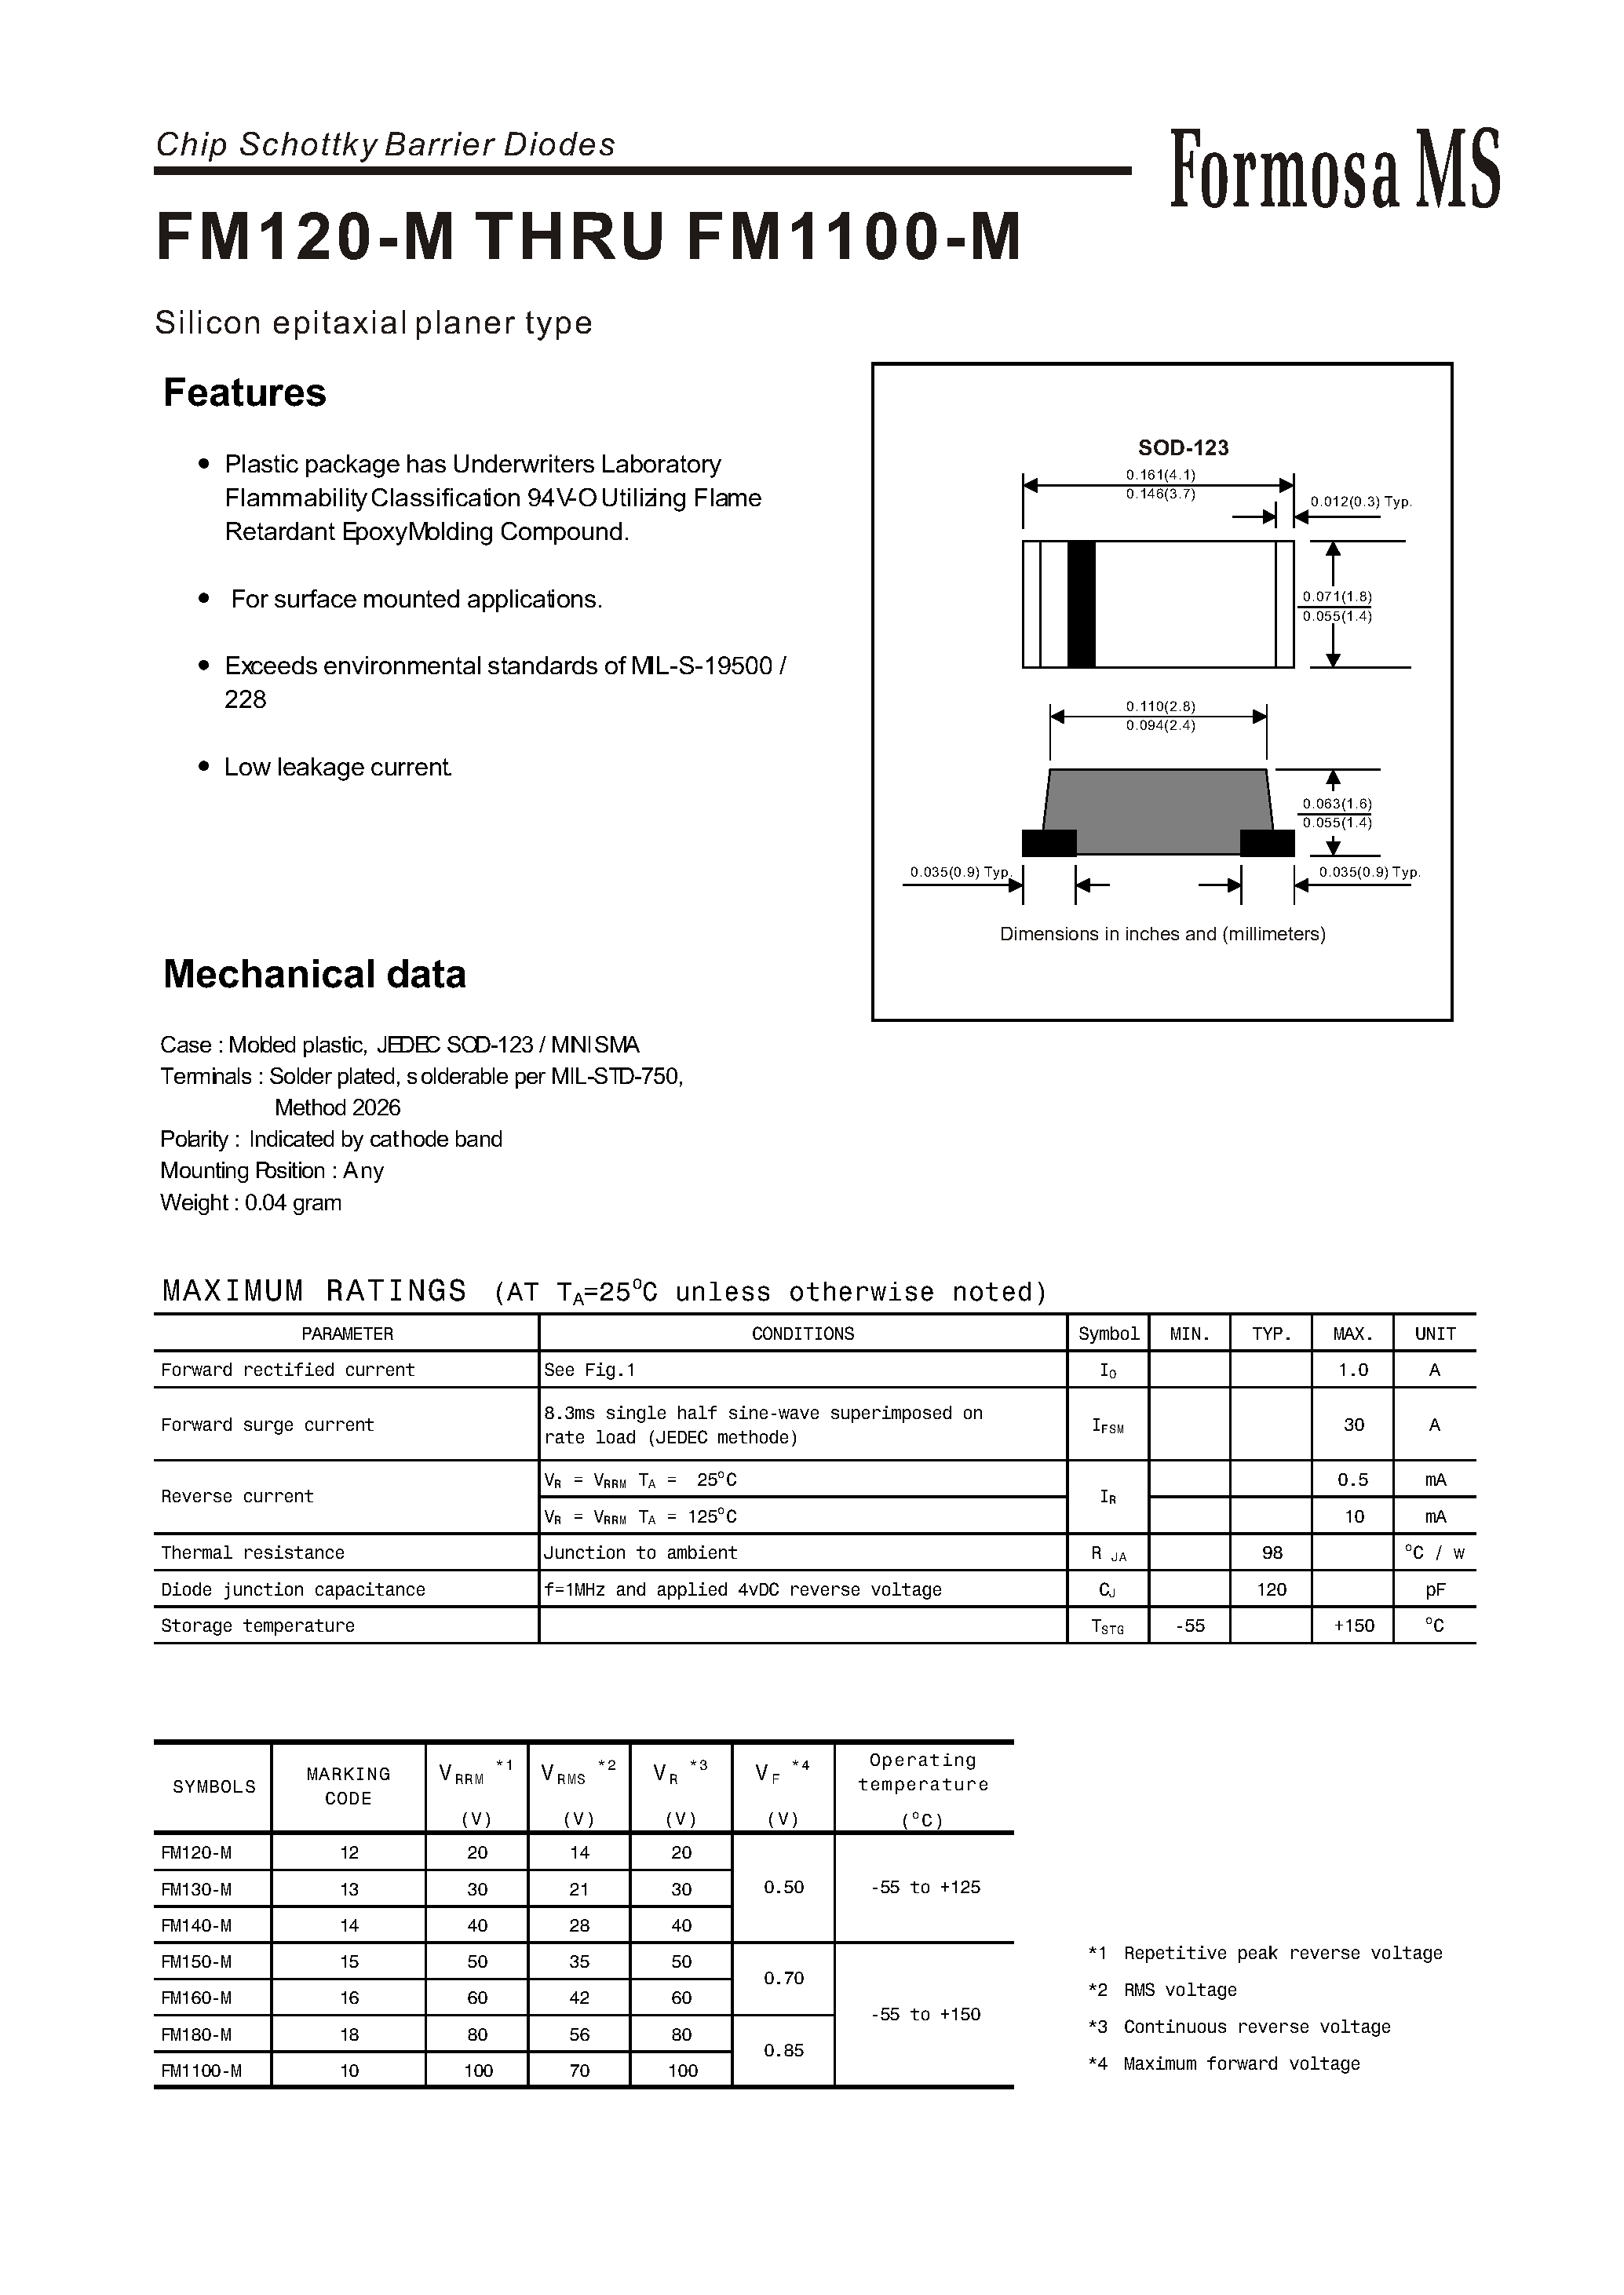 Datasheet FM1100-M - Silicon epitaxial planer type page 1